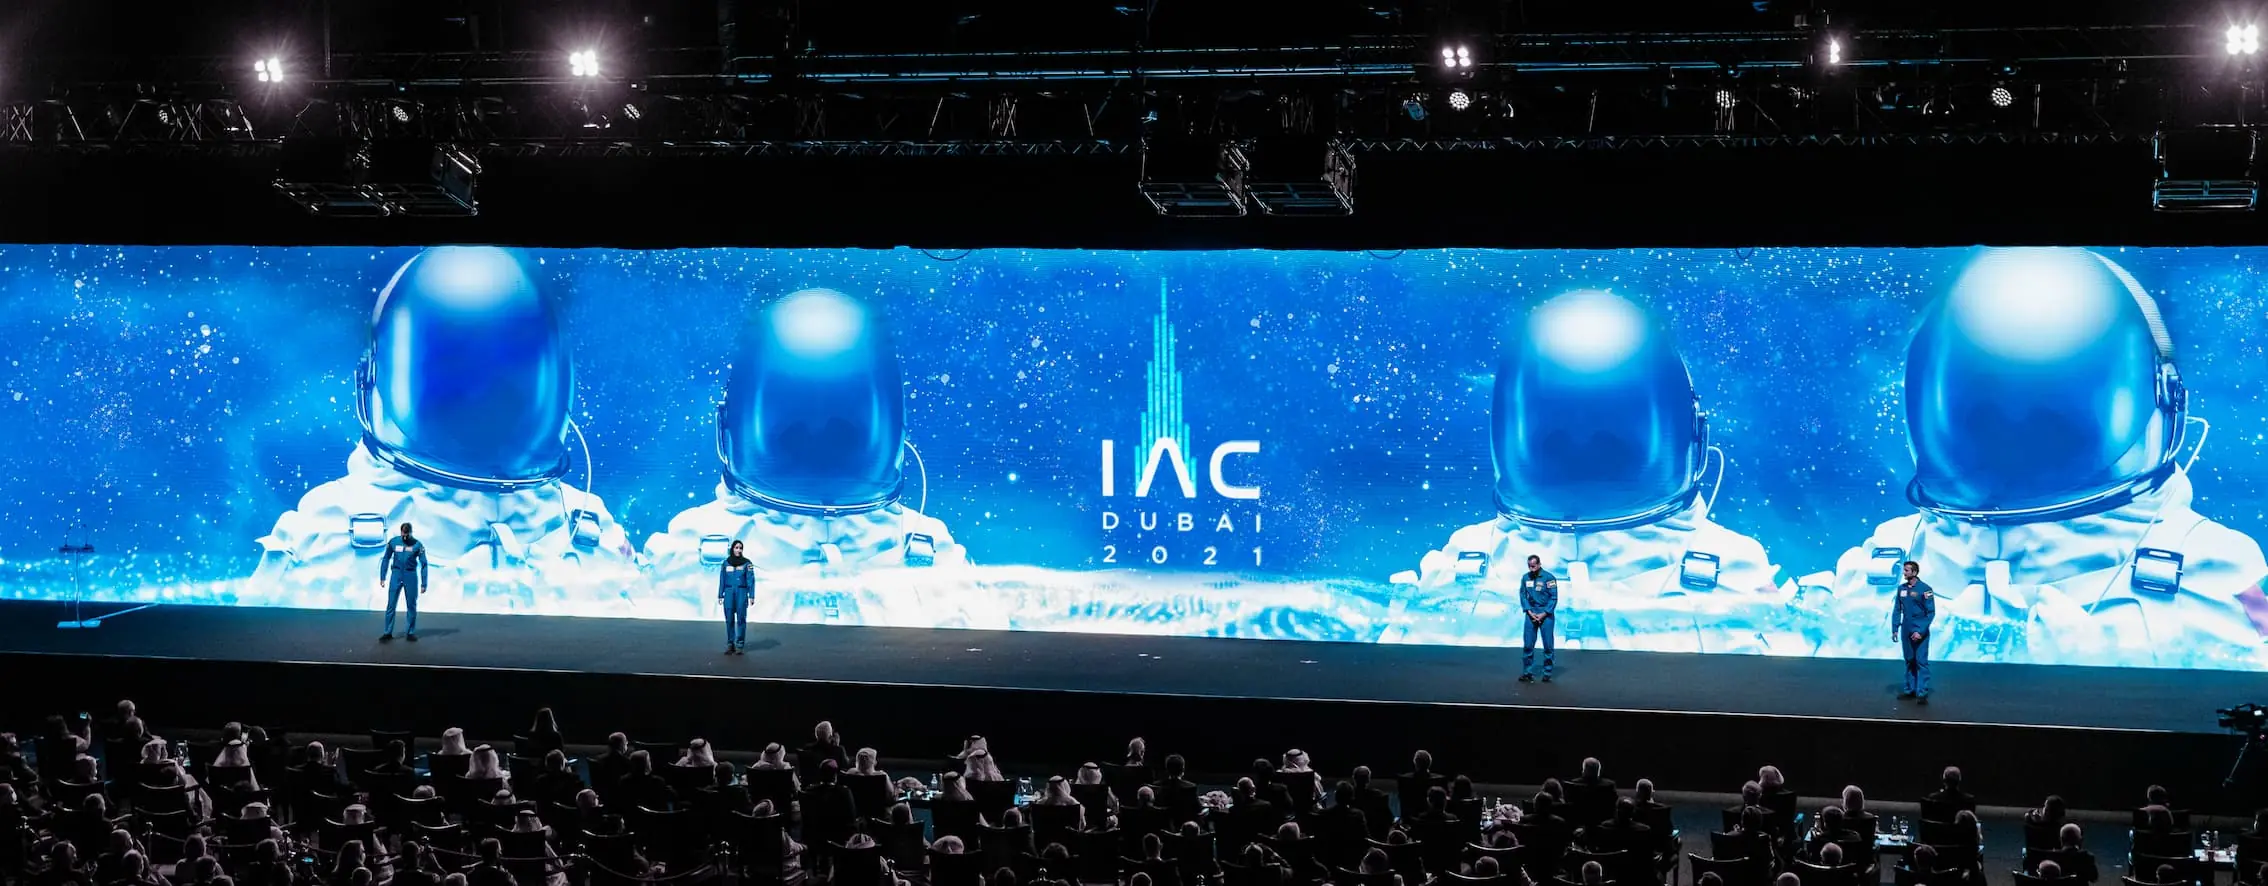 The main stage at IAC 2021